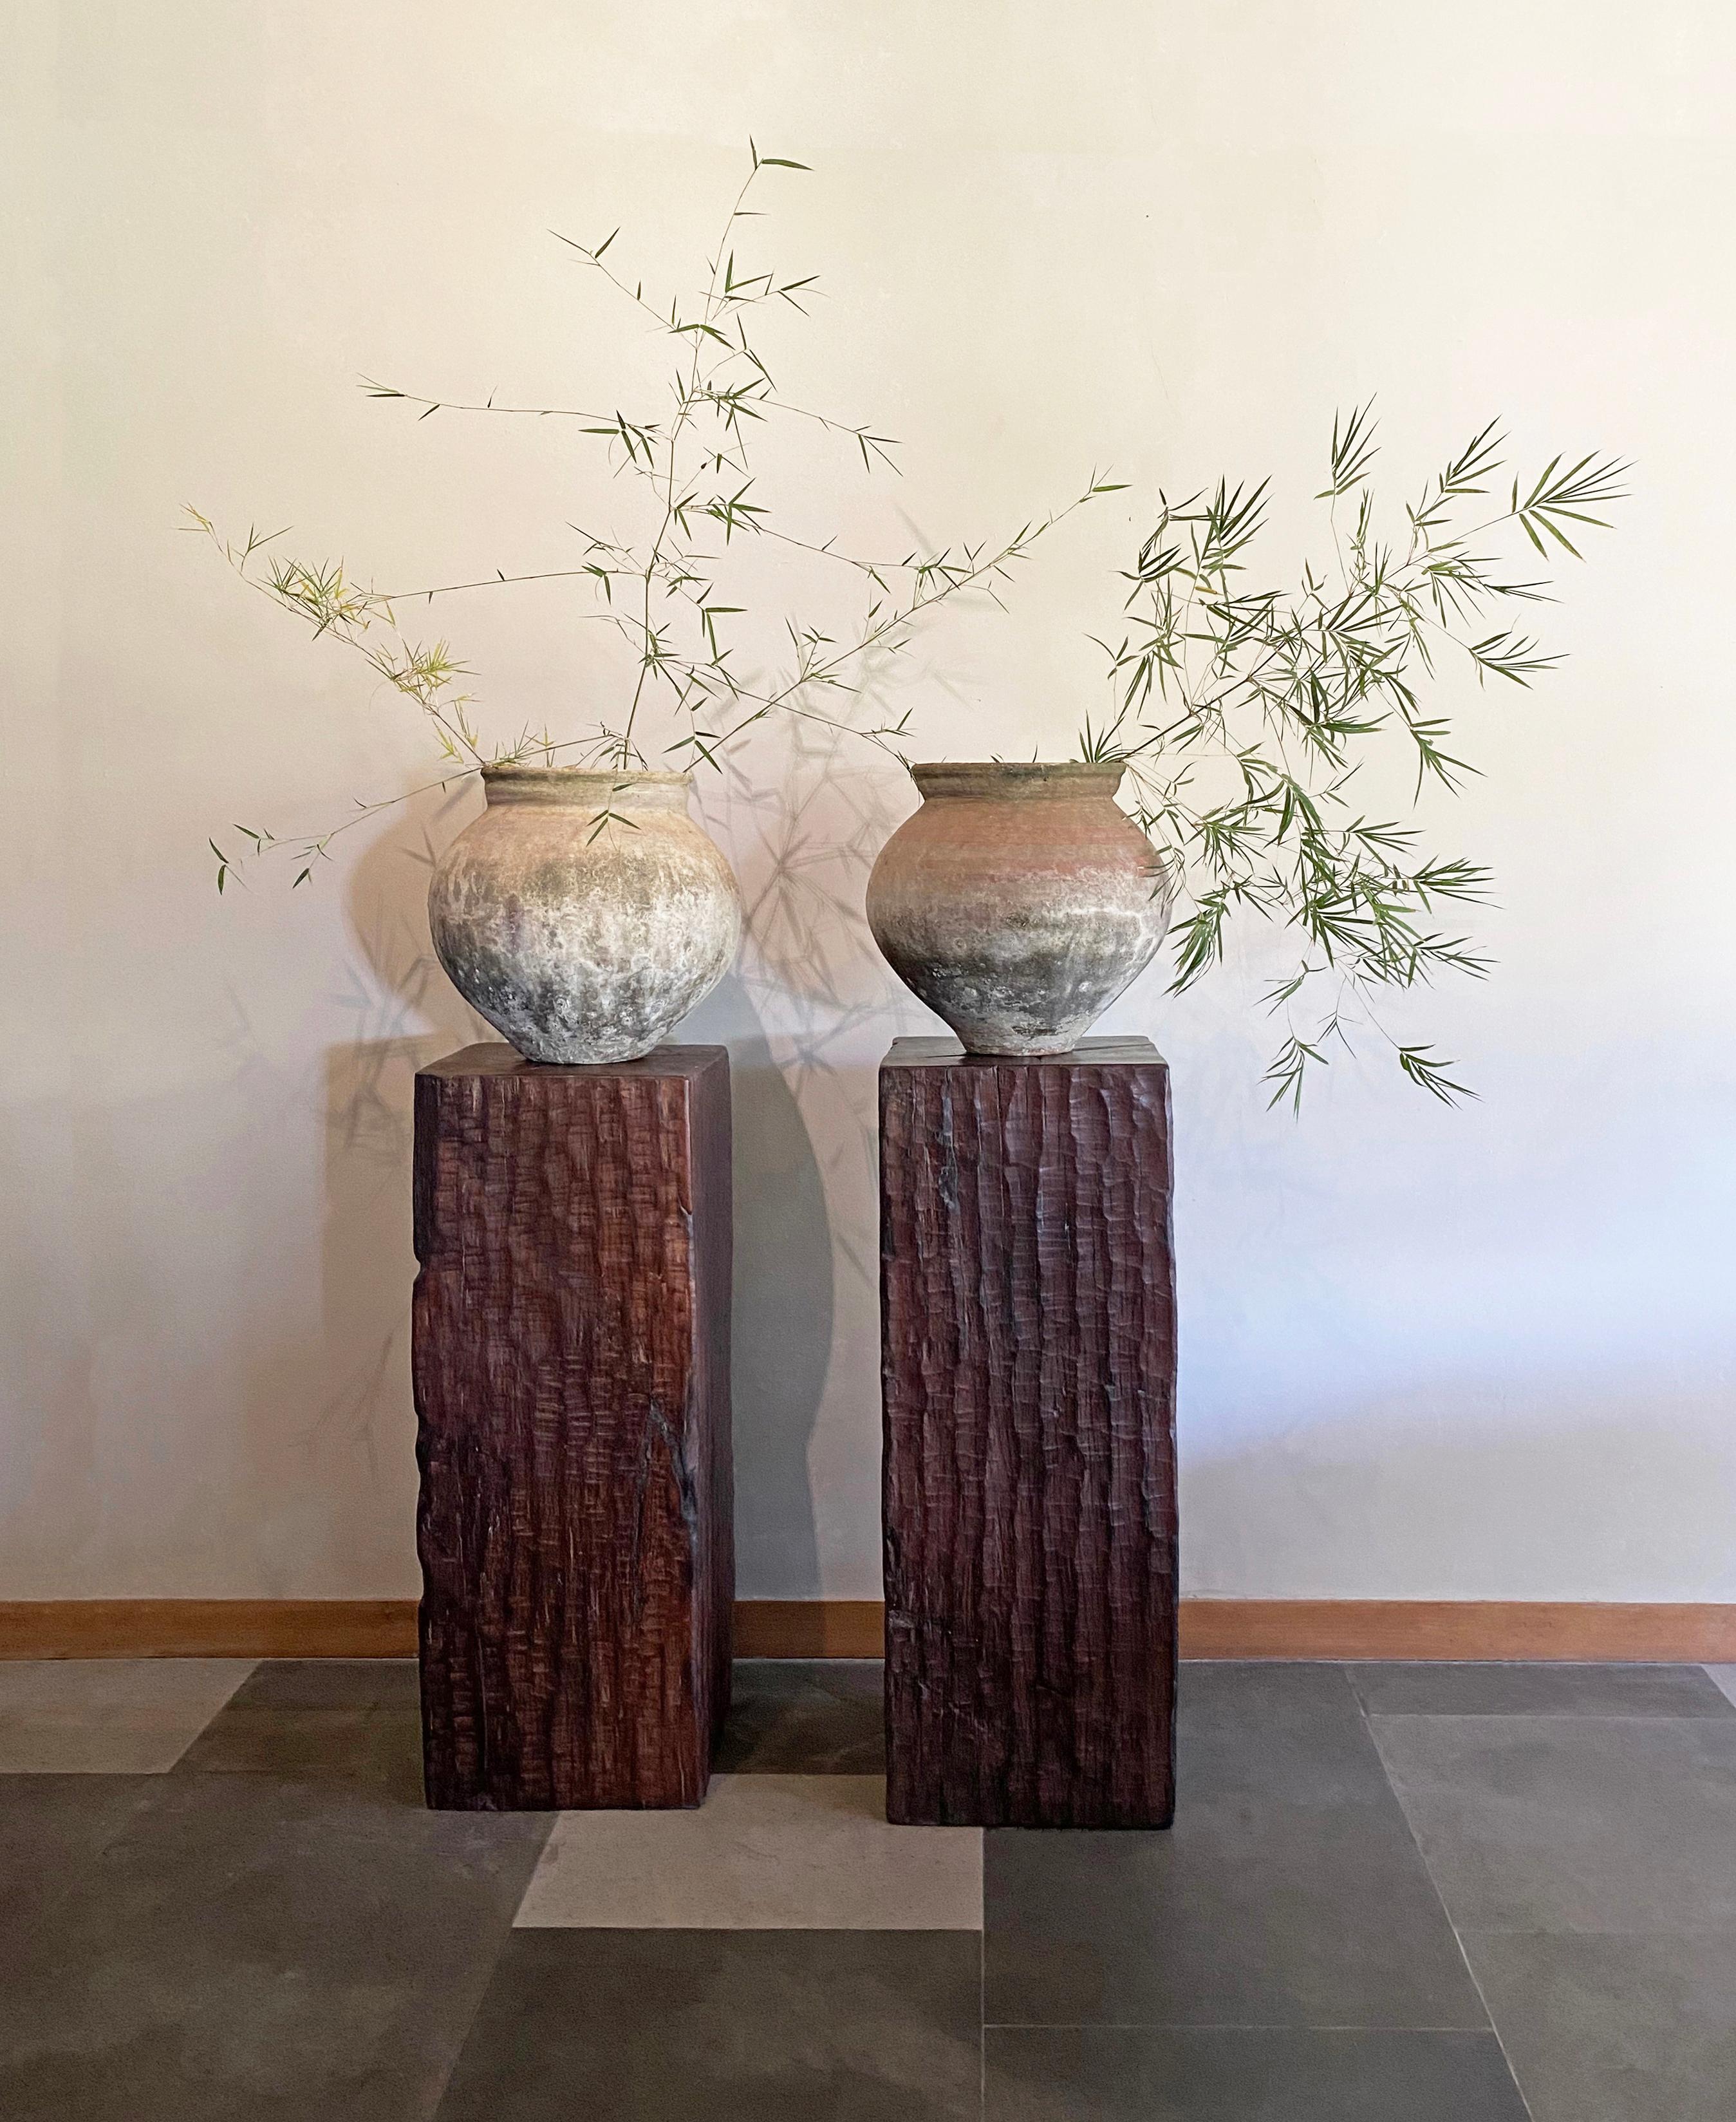 An incredibly heavy and solid Iron Wood Pedestal sourced from Kalimantan, Indonesia. This lovely sculptural object was crafted from a solid block of wood. A raw and organic object with beautiful textures. Indonesian Iron Wood, or 